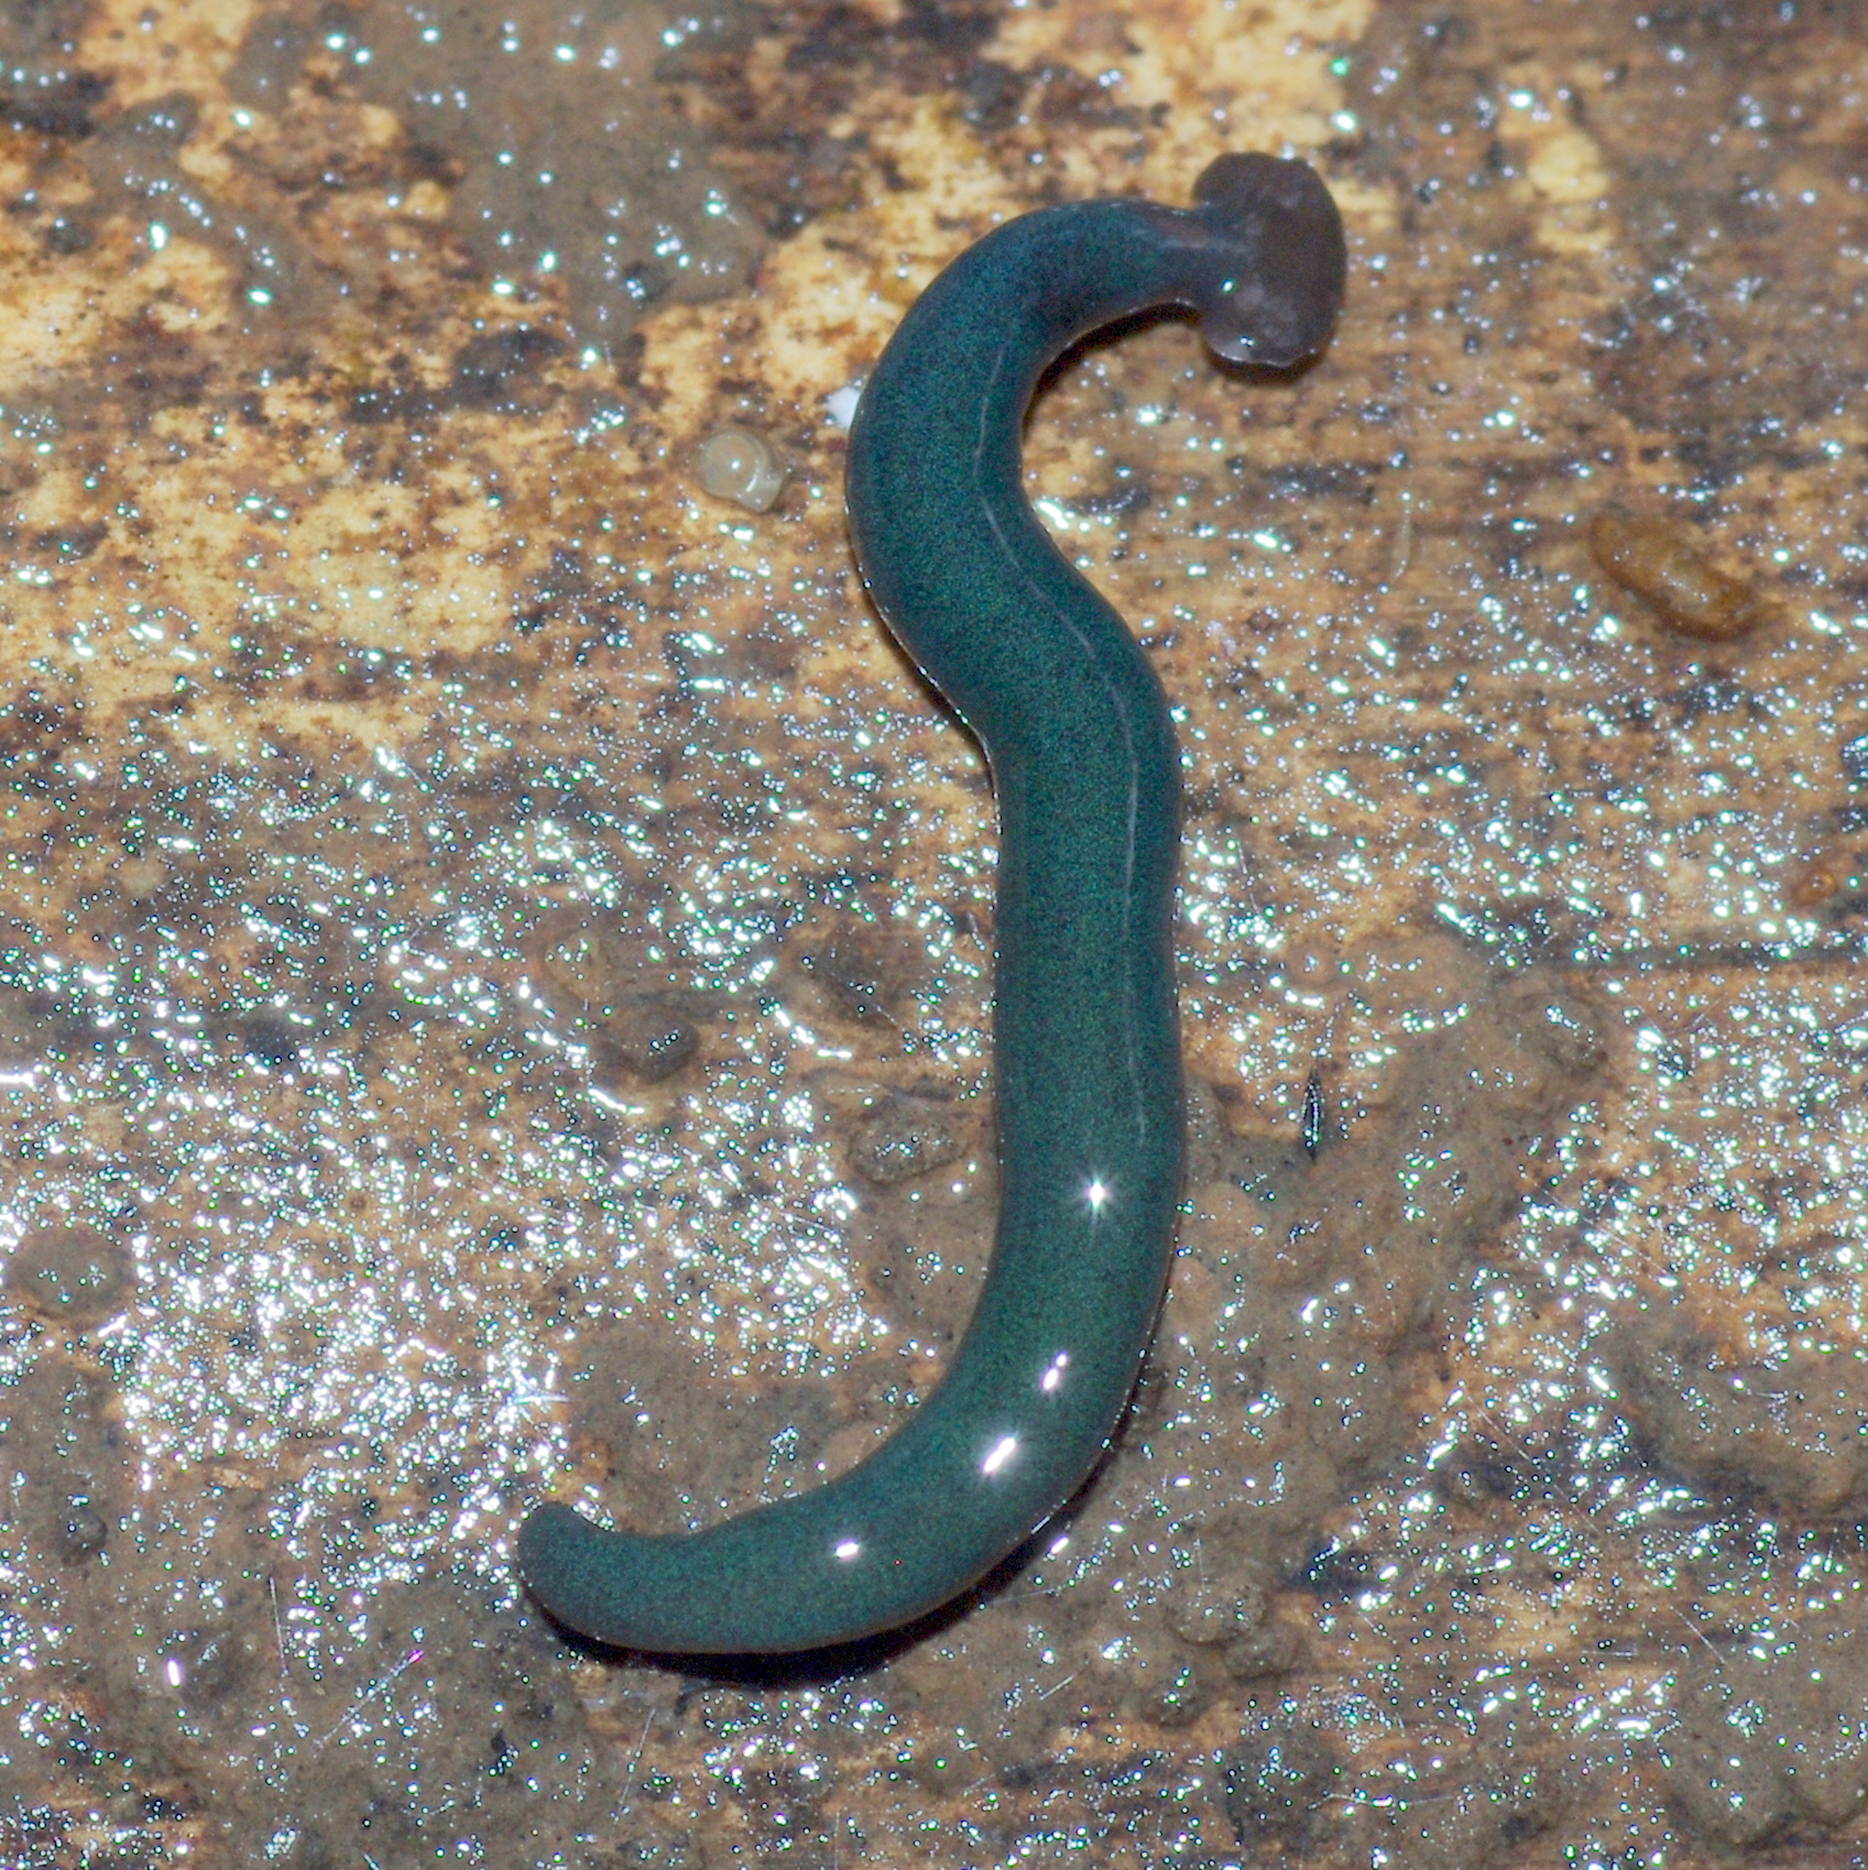 Scientists Have Named an ‘Alien’ Predatory Flatworm After COVID